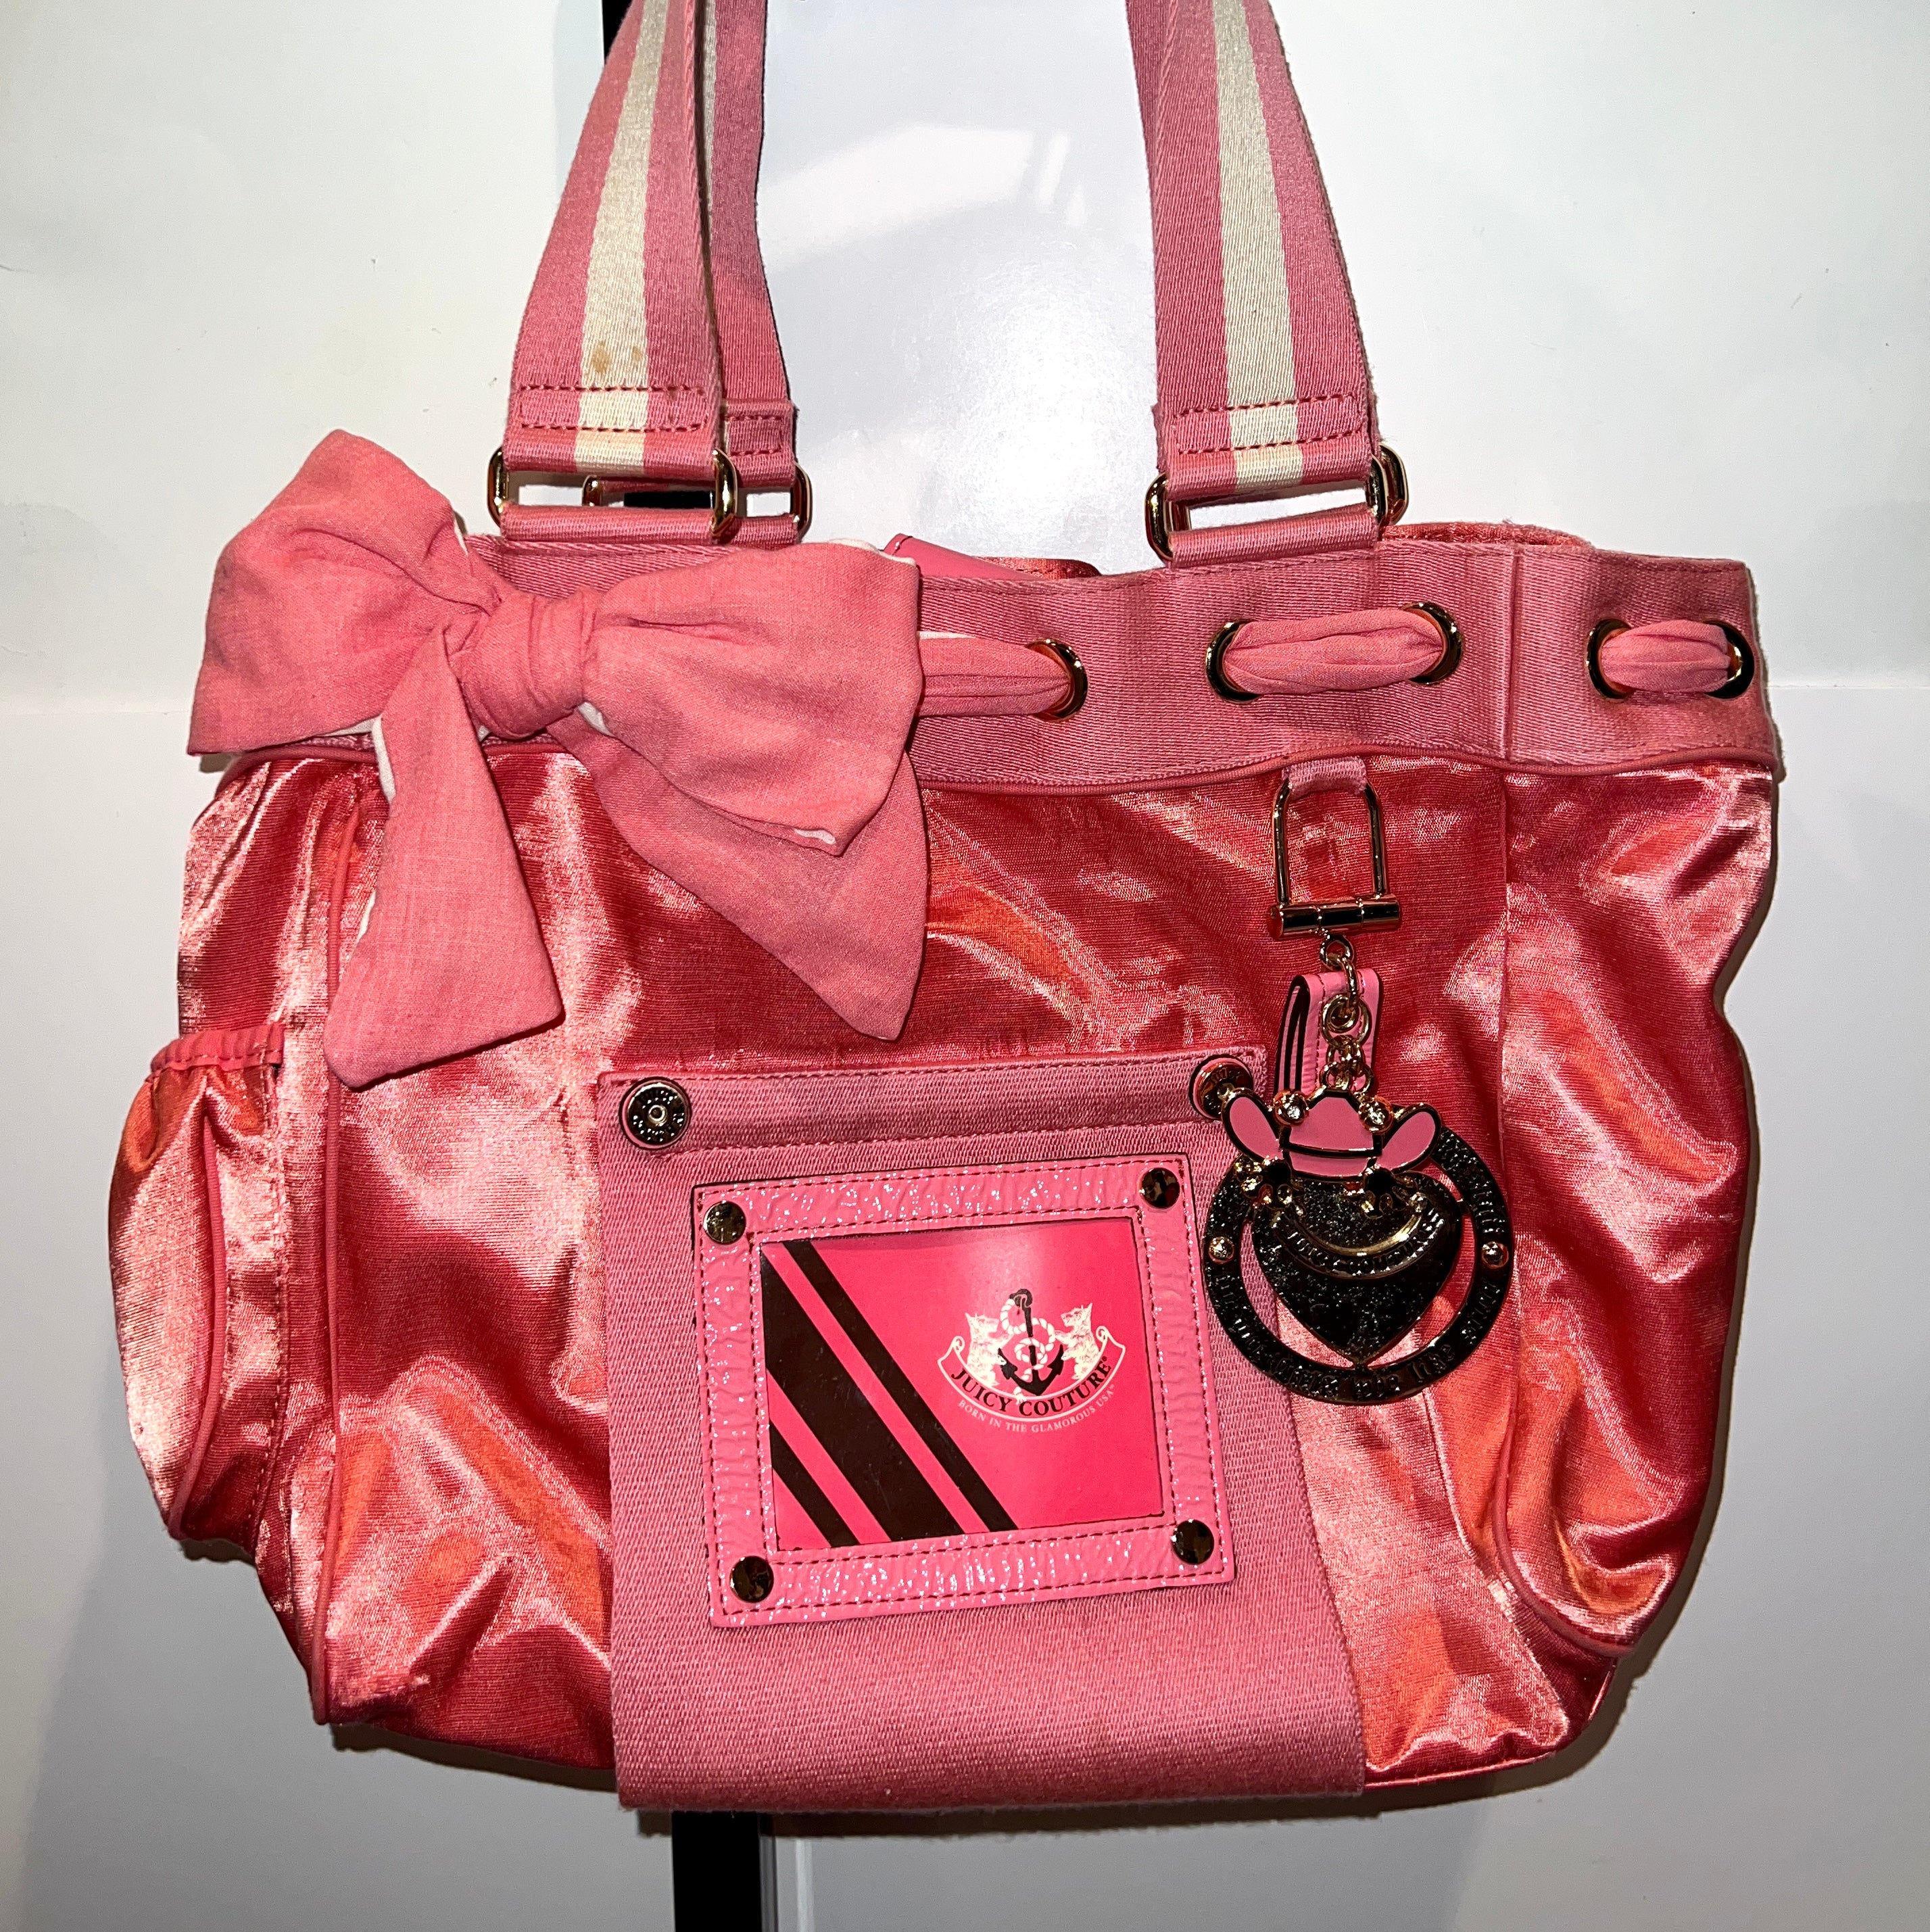 Juicy Couture pink and beige scottie dog daydreamer tote｜TikTok Search